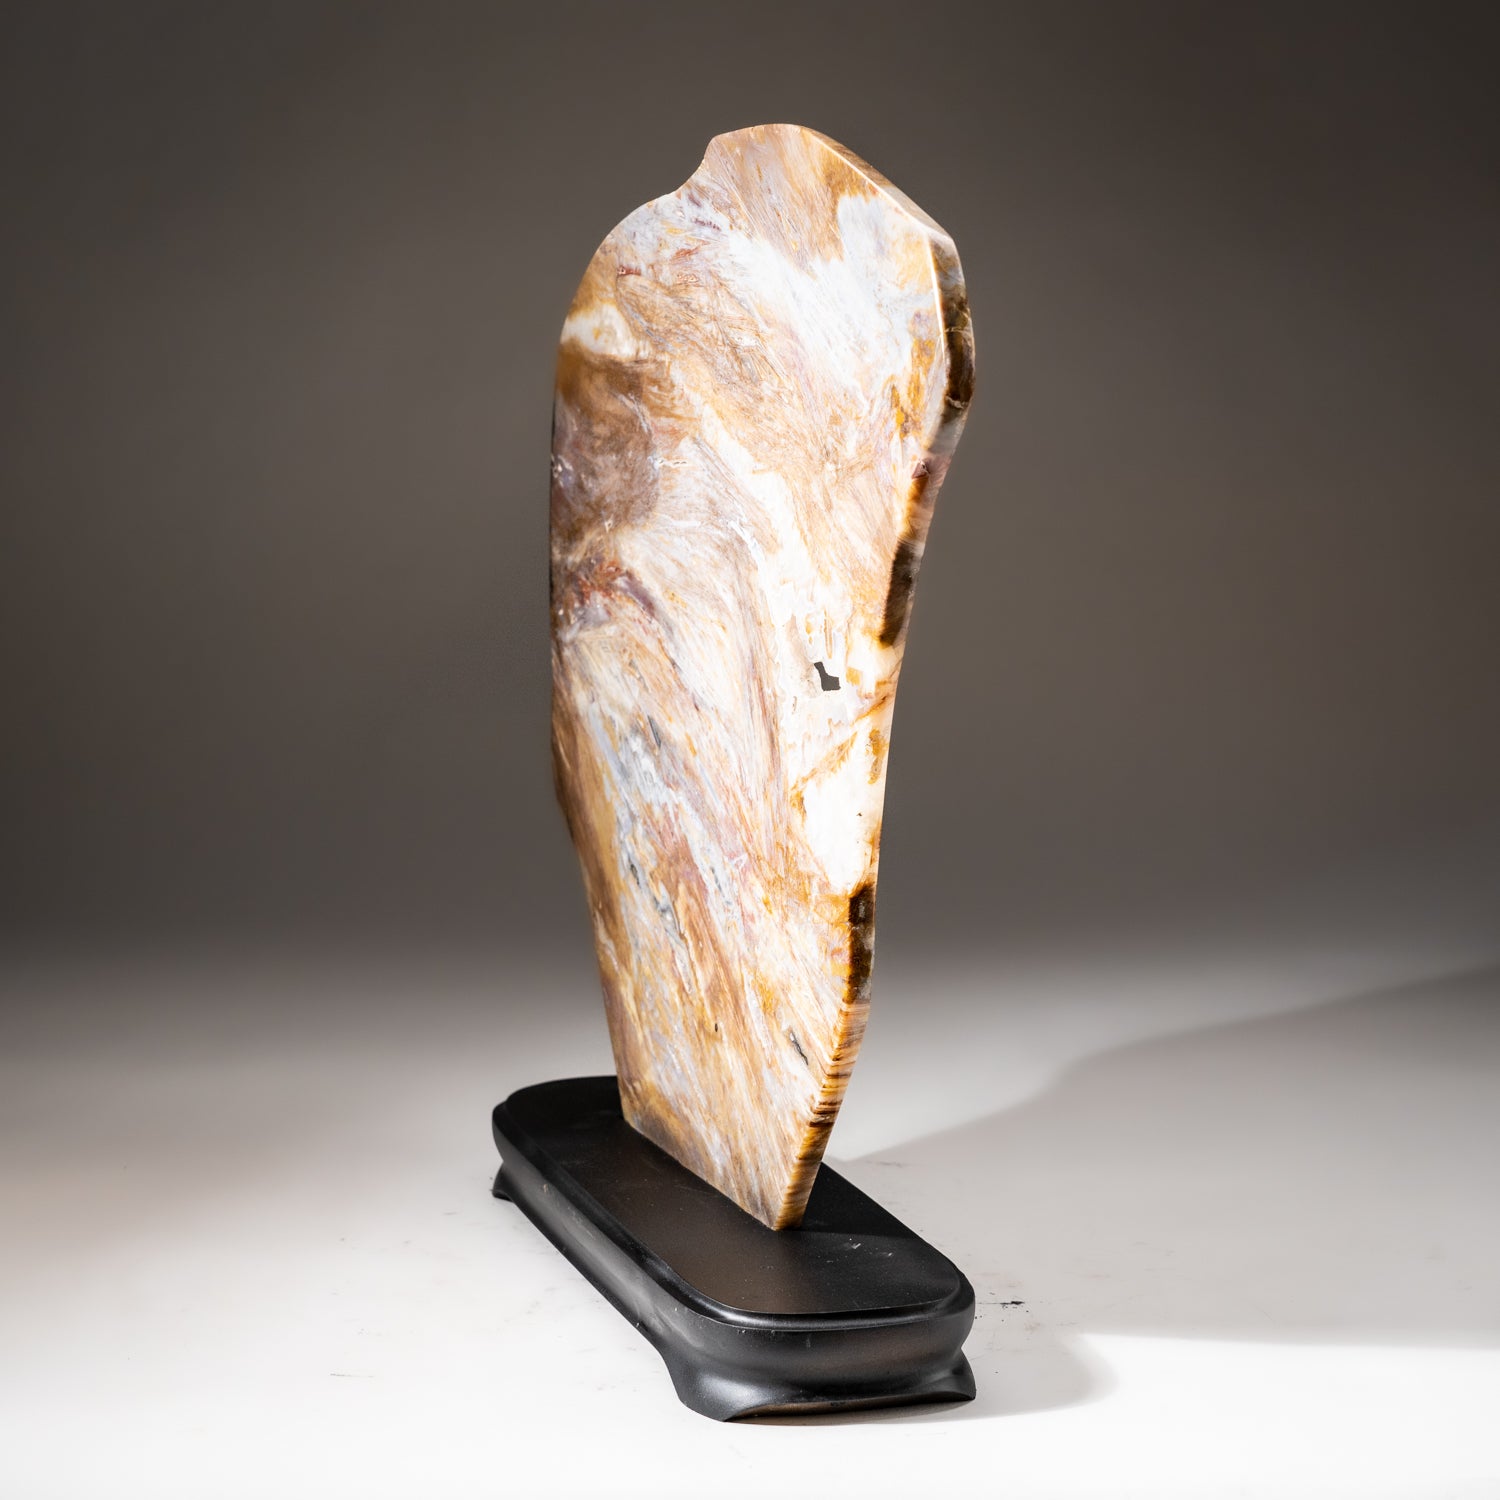 Polished Natural Agate Slice on Wooden Stand (7 lbs)